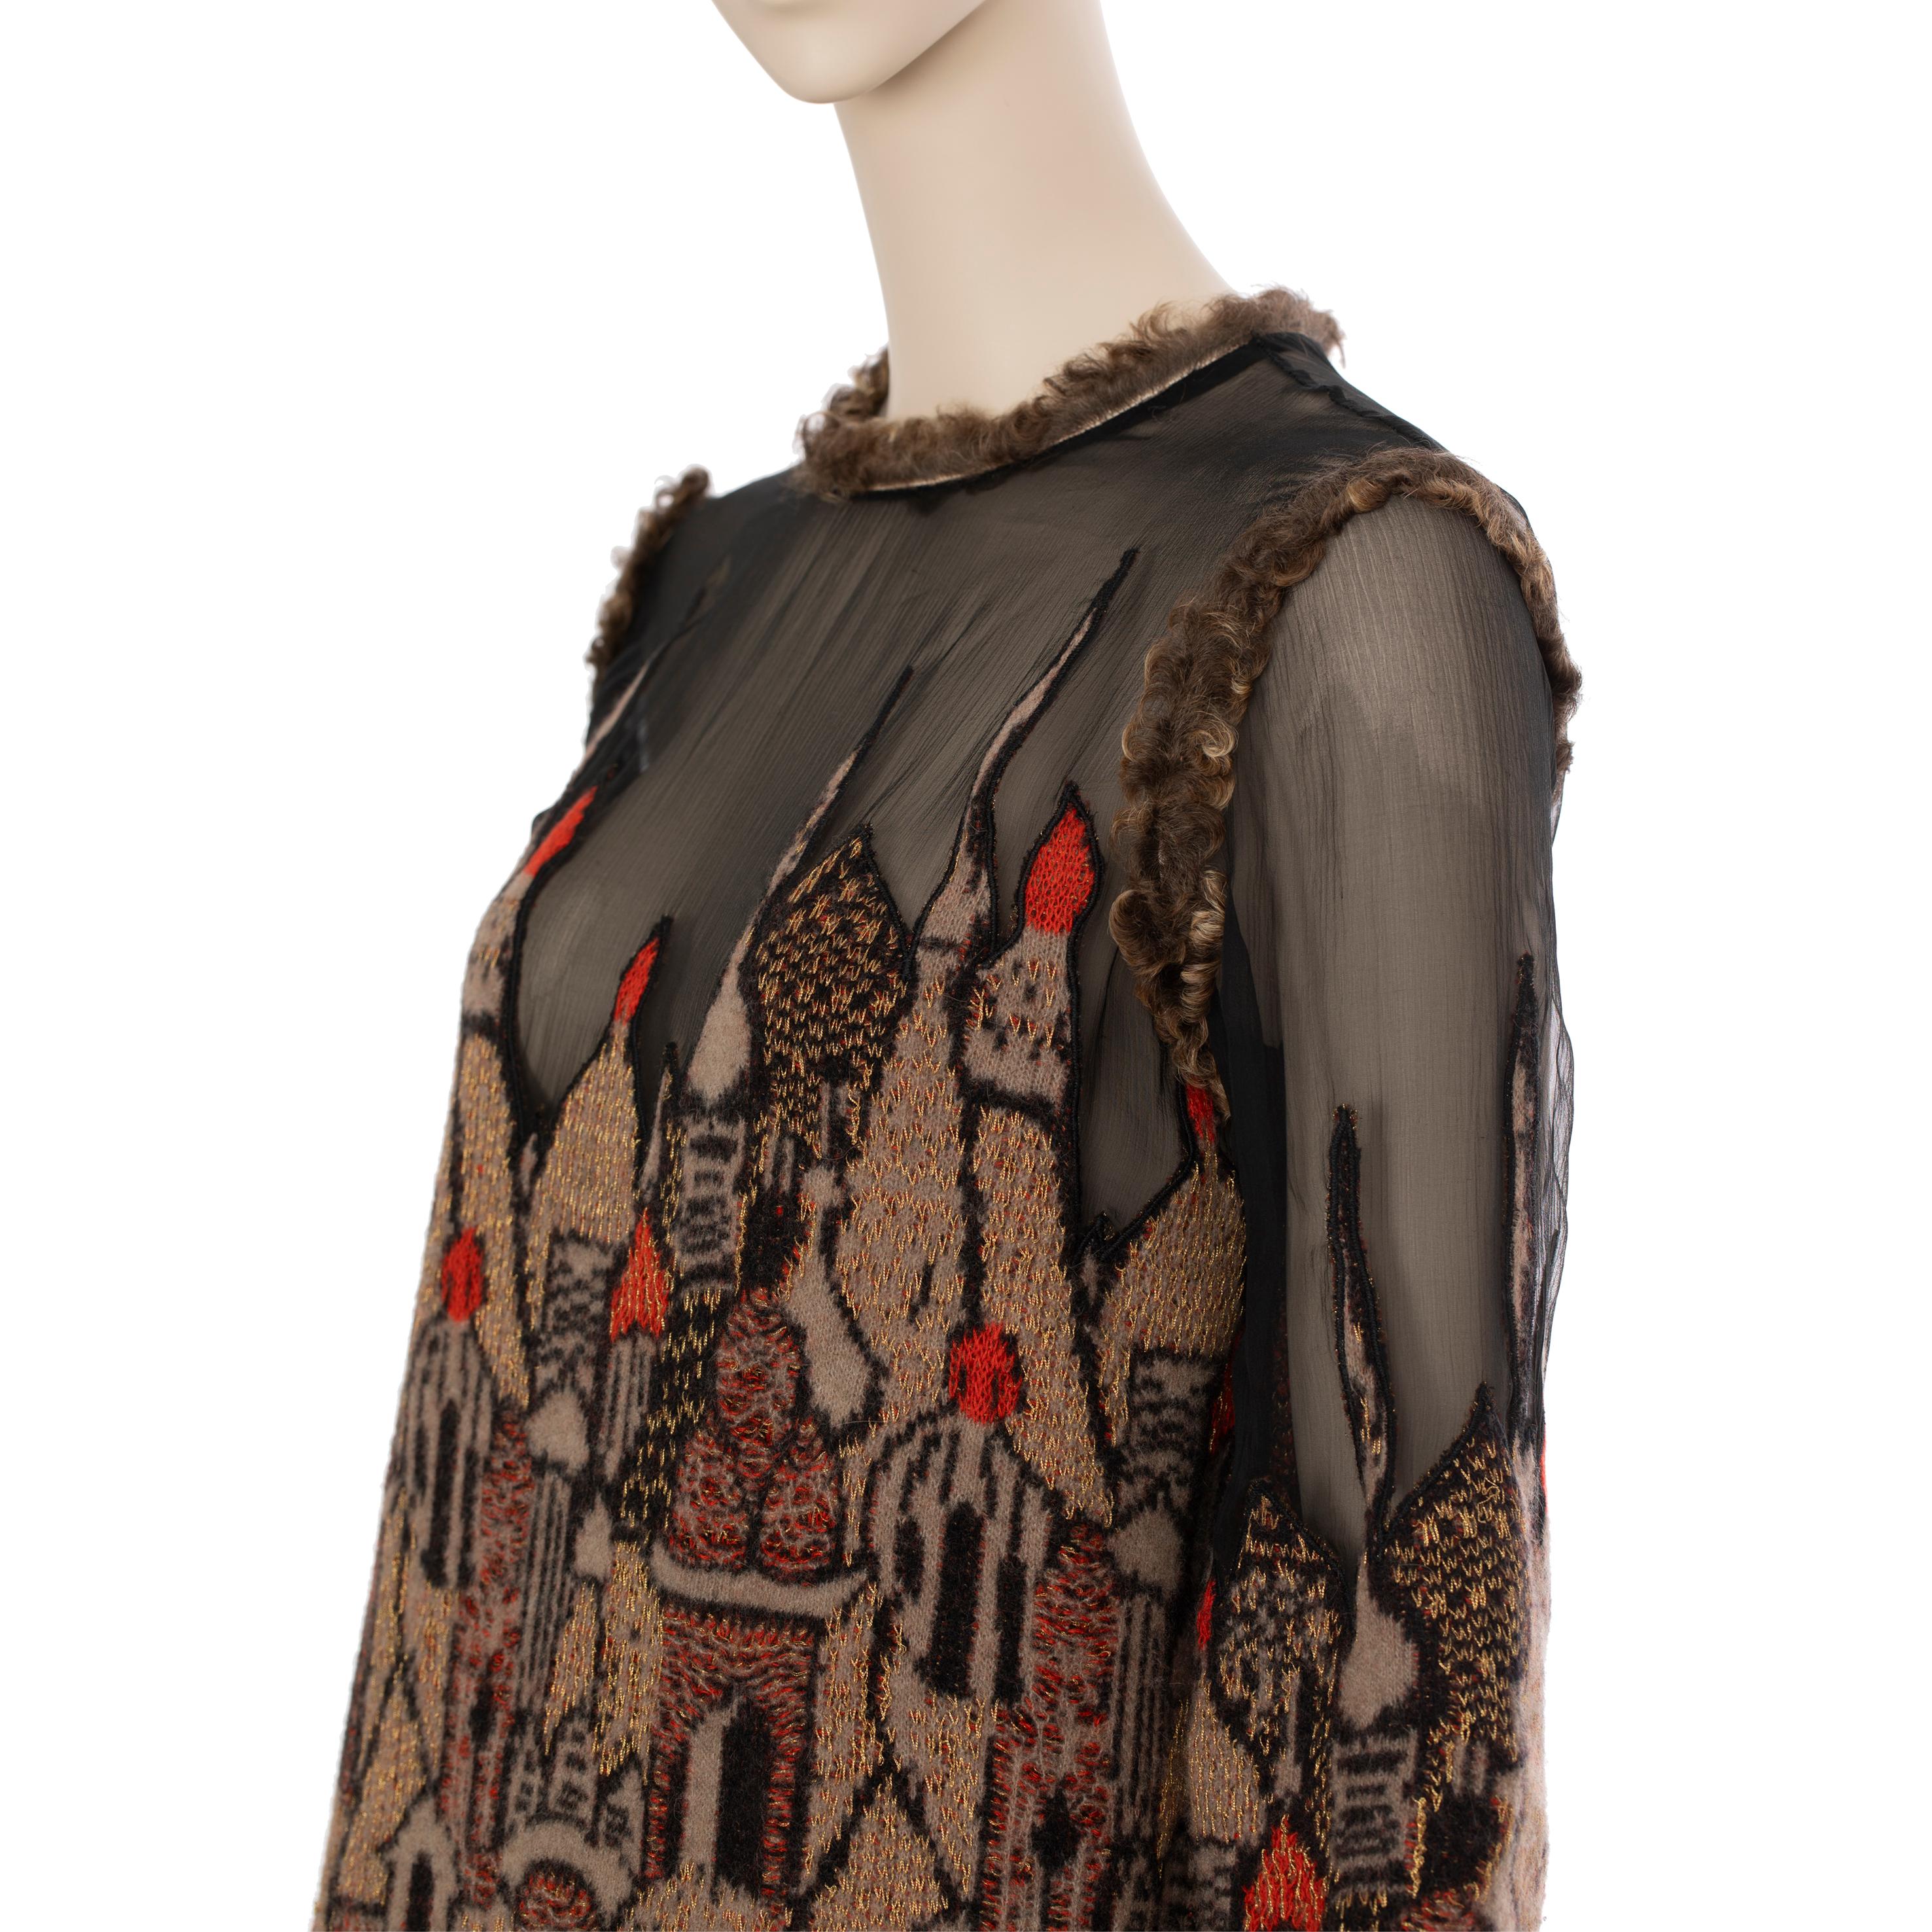 Chanel Metiers D'Art Moscow Dress 38 FR 5